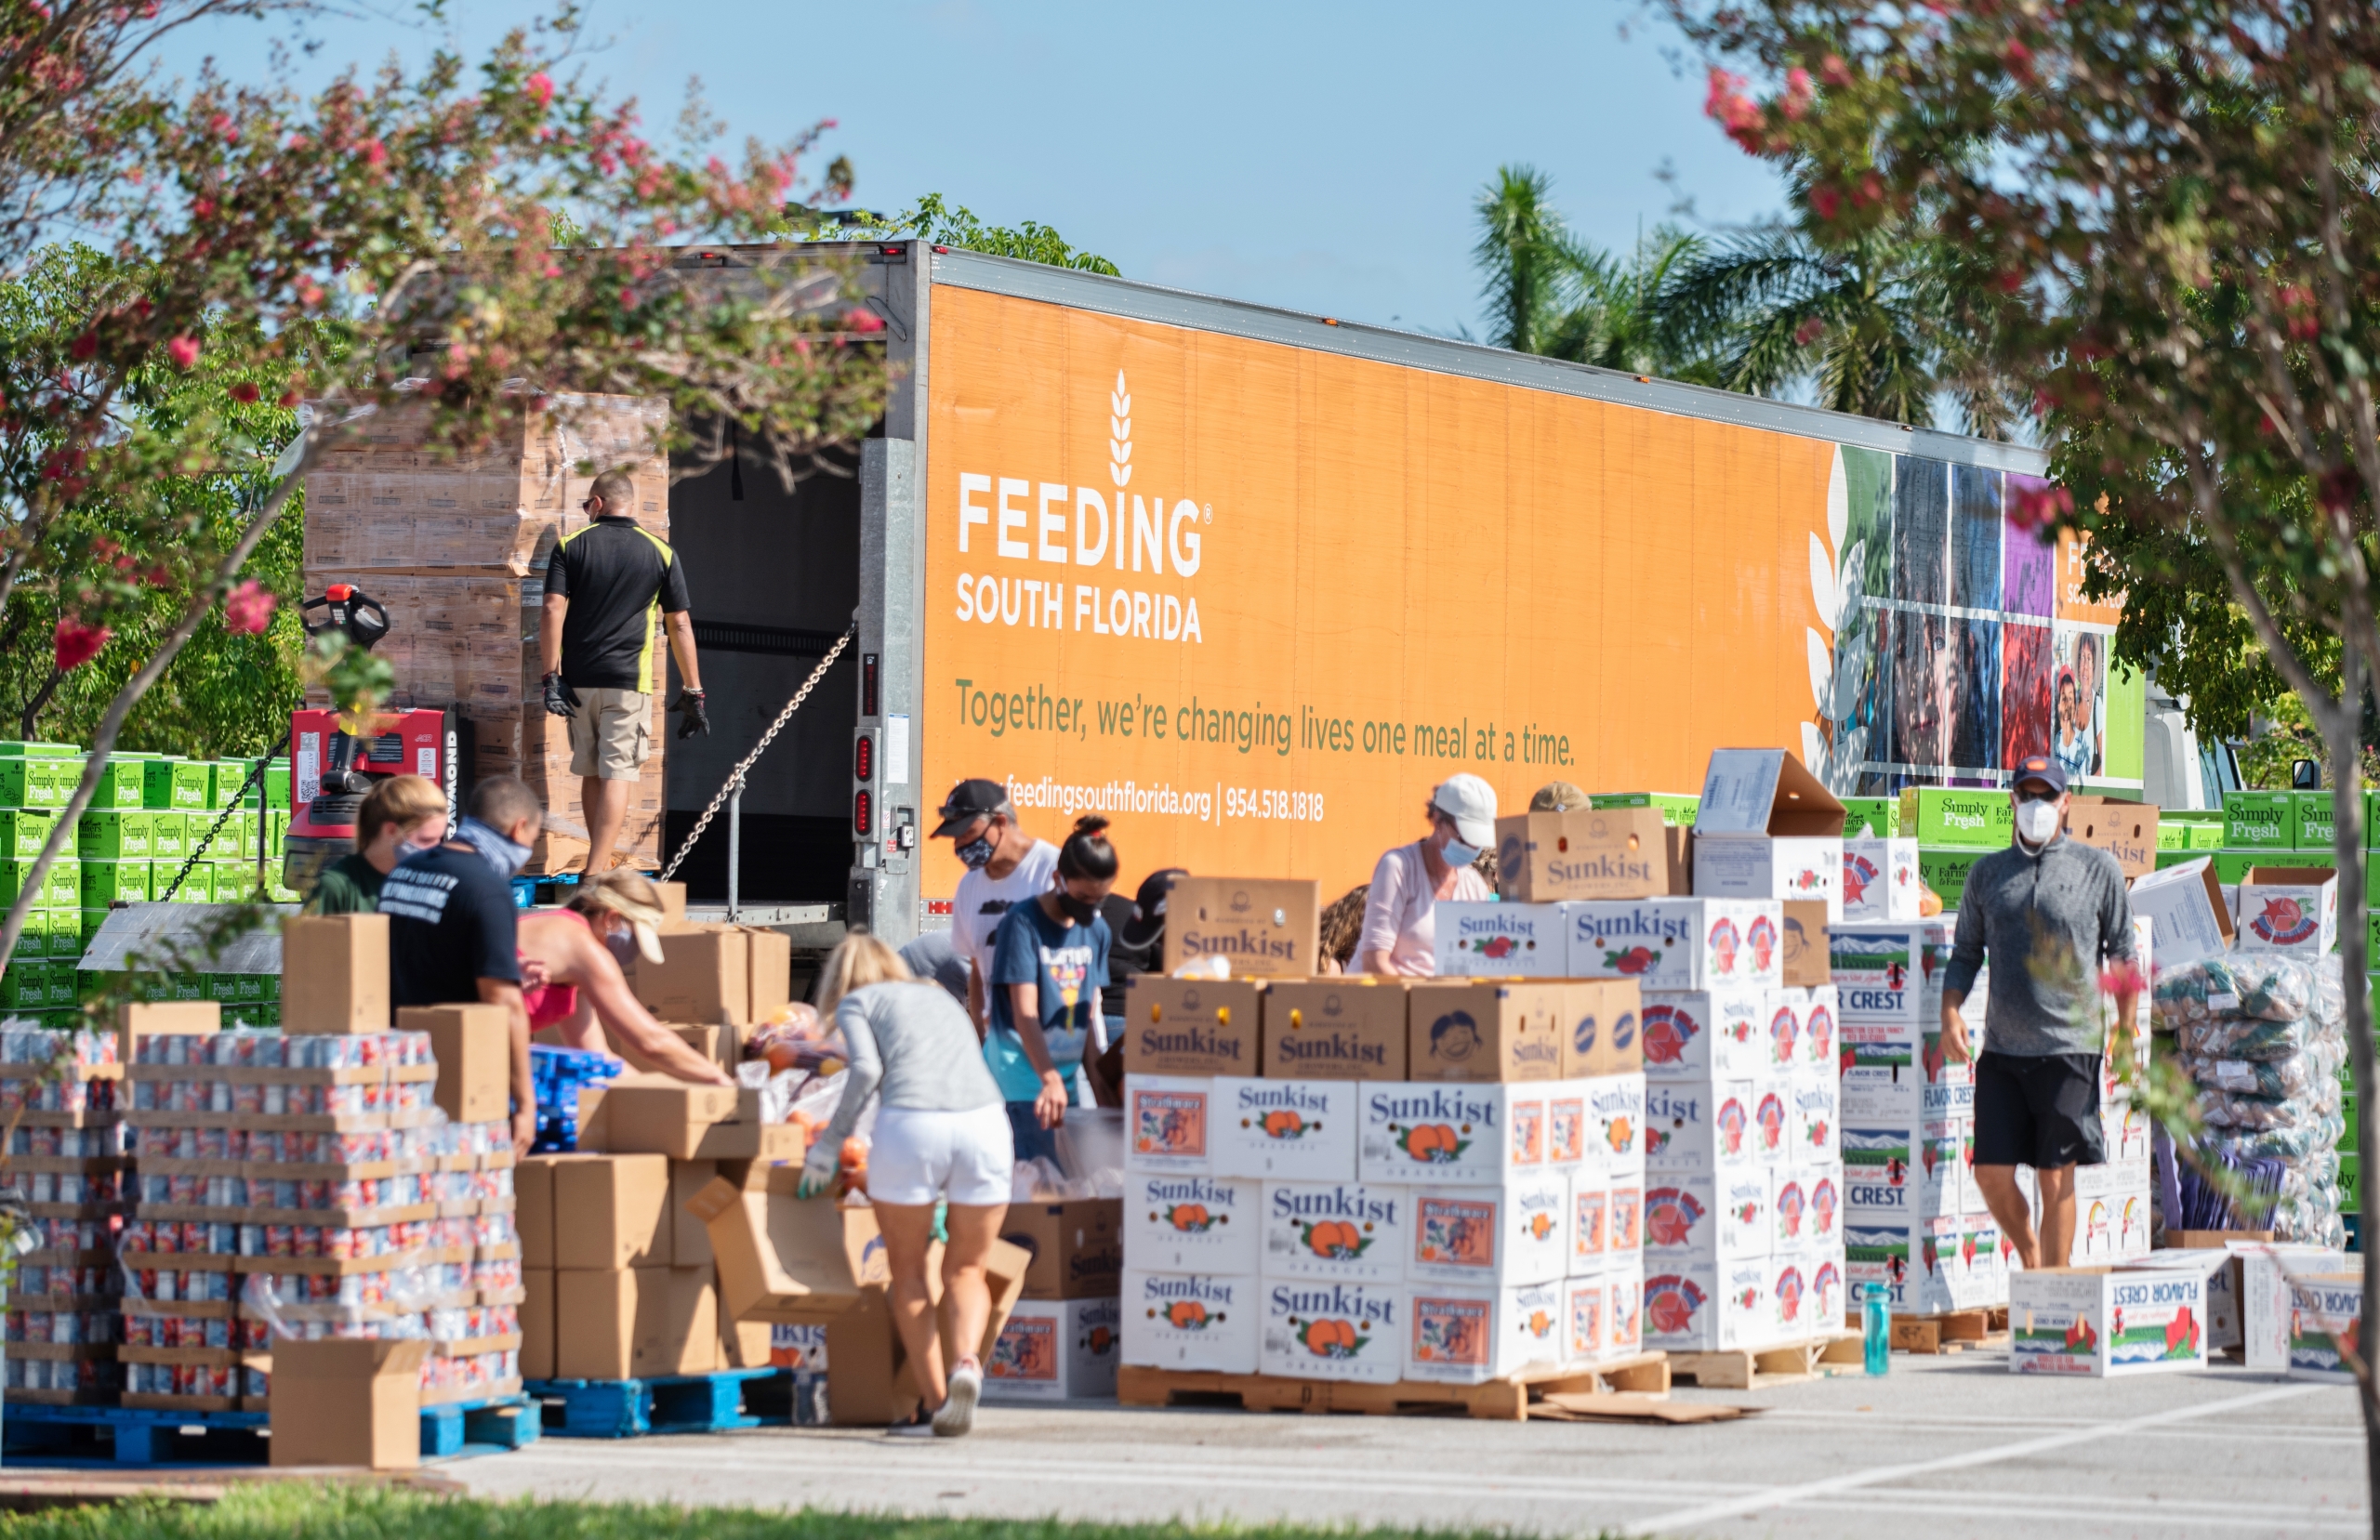 Feeding South Florida Truck Offloaded with Food at Drive-Thru Distribution in 2020.